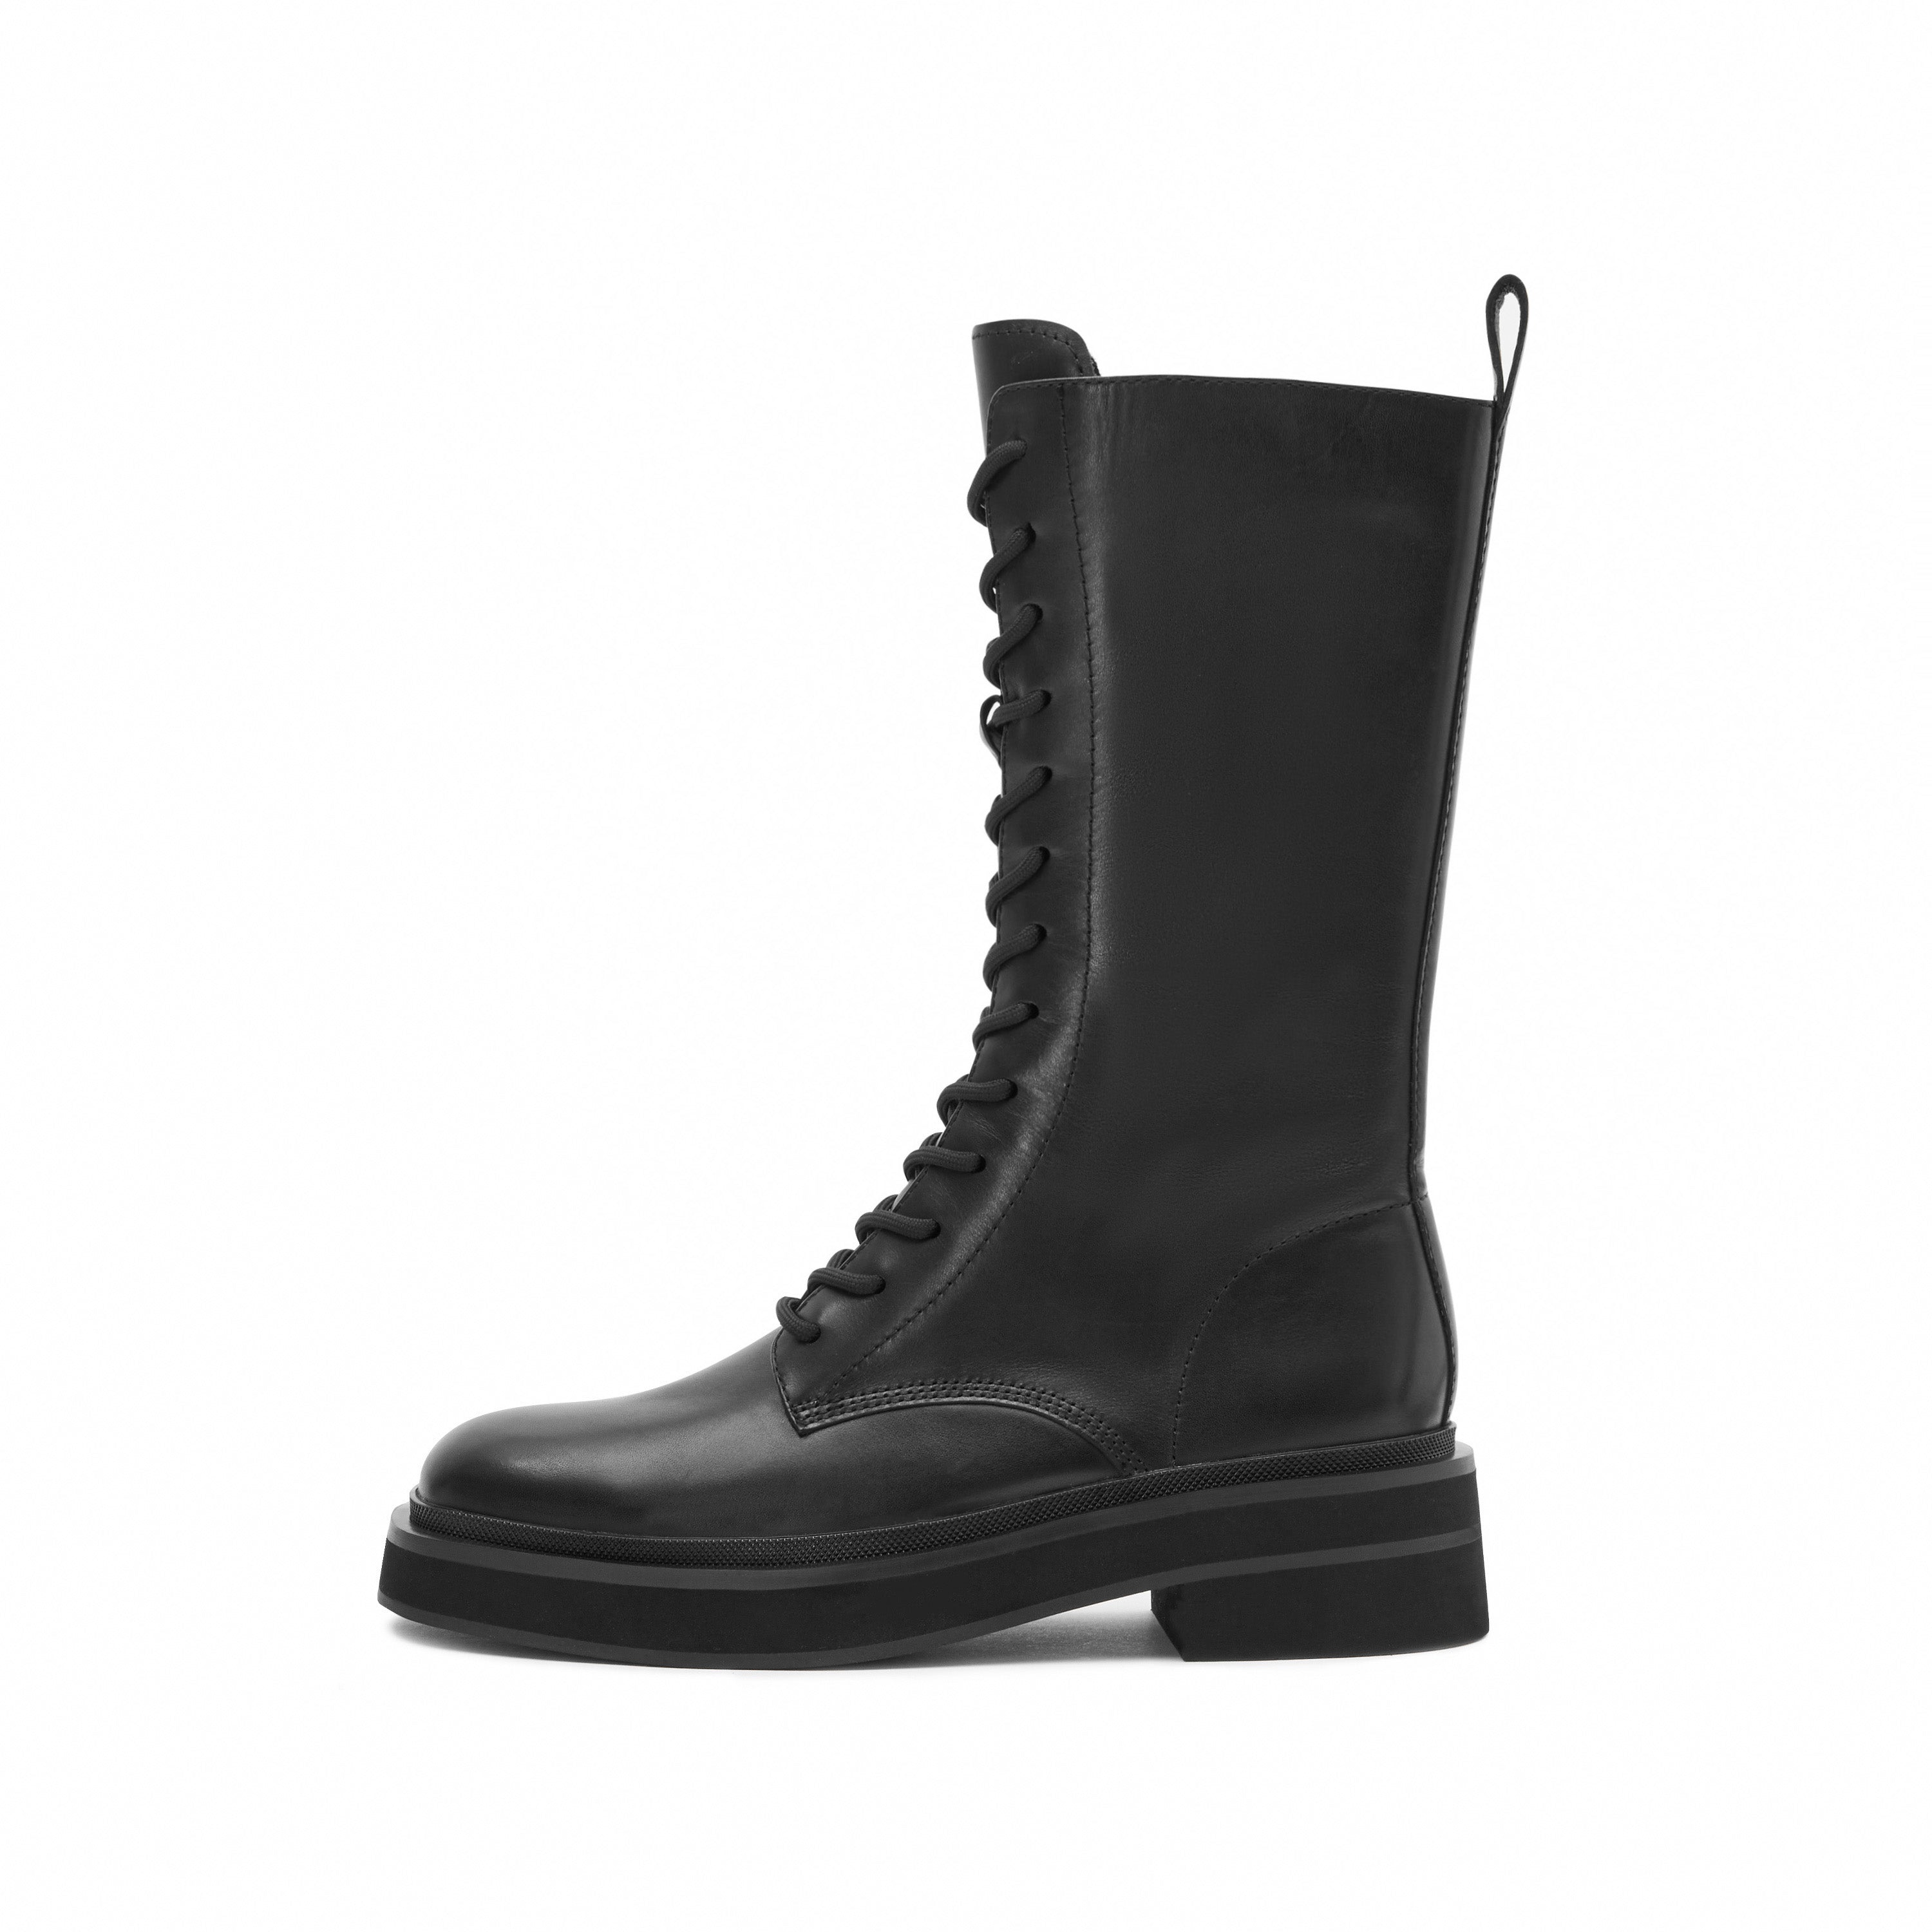 [STACCATO - Official Site] Black Lace Up Combat Boots